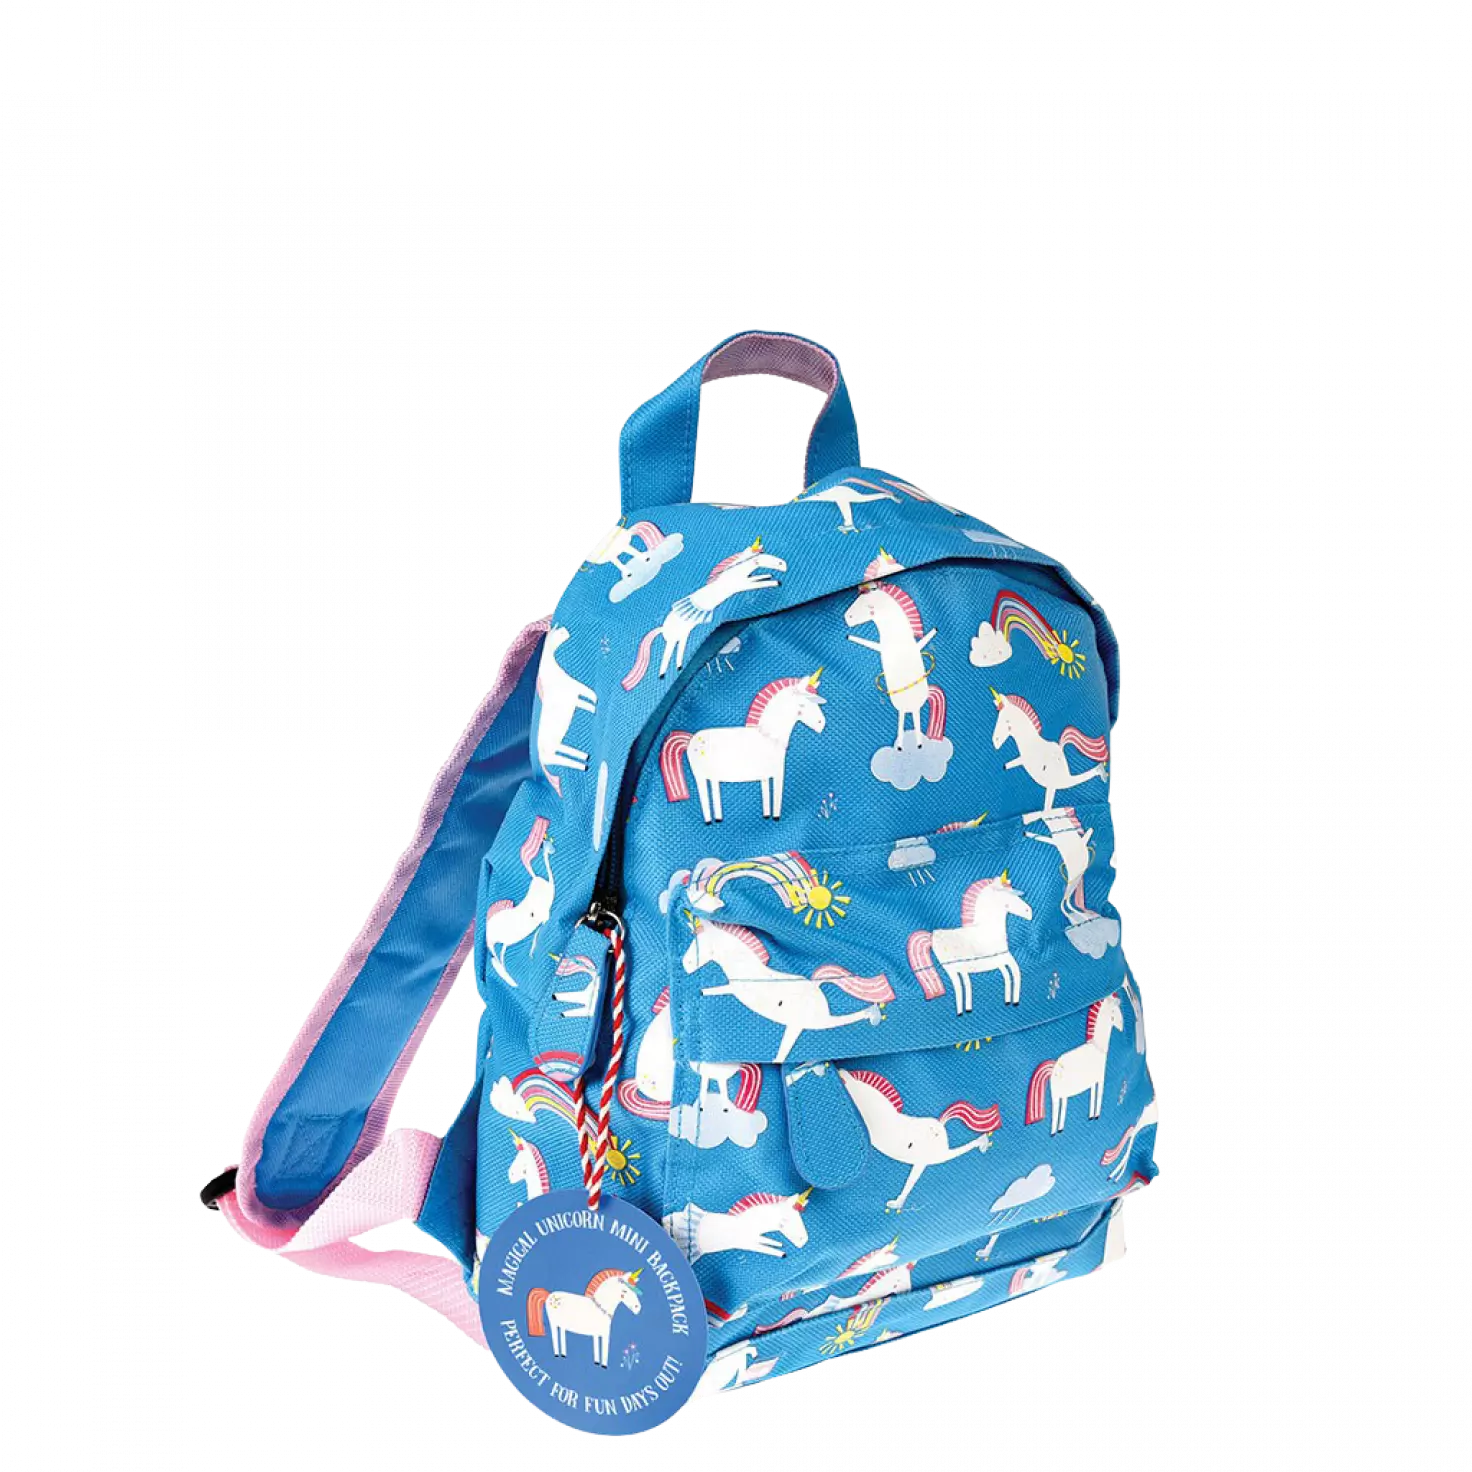 A child's backpack by Rex London, style Magical Unicorn,in blue with white multi unicorn and rainbow print, two compartments and zip fastenings. Angled view.